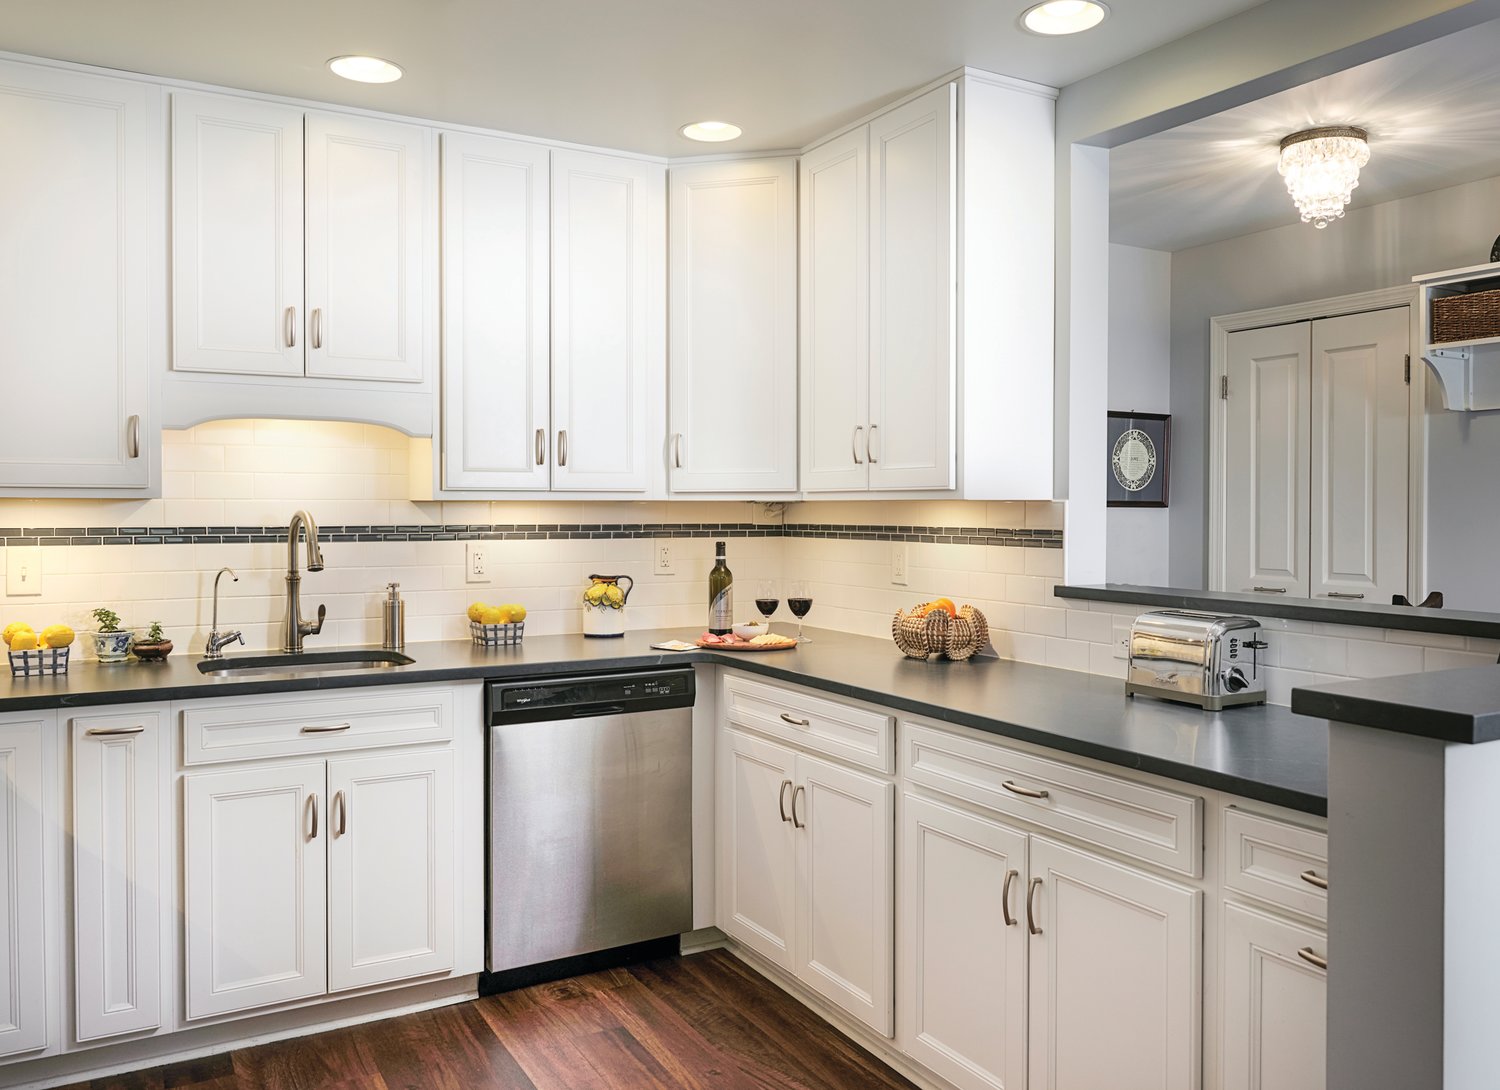 The Bings’ sparkling white kitchen is a central part of their apartment’s open floor plan.